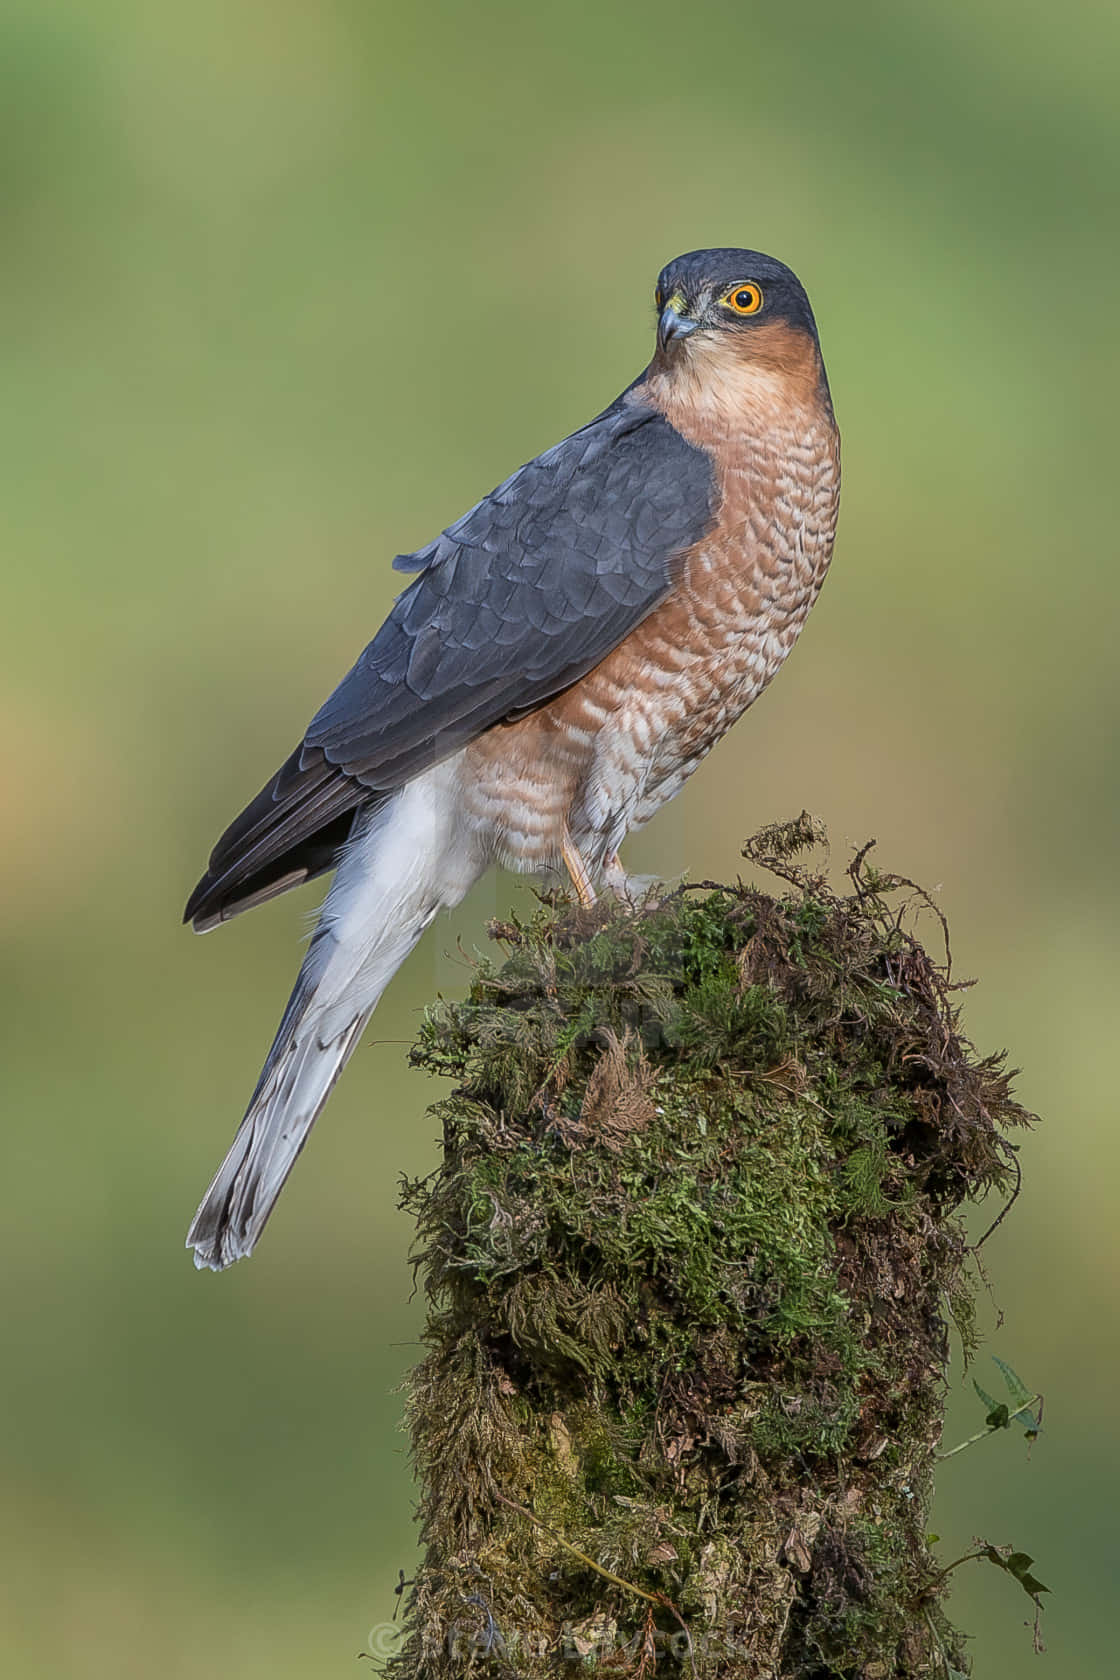 “The Majesty of the Sparrow Hawk”